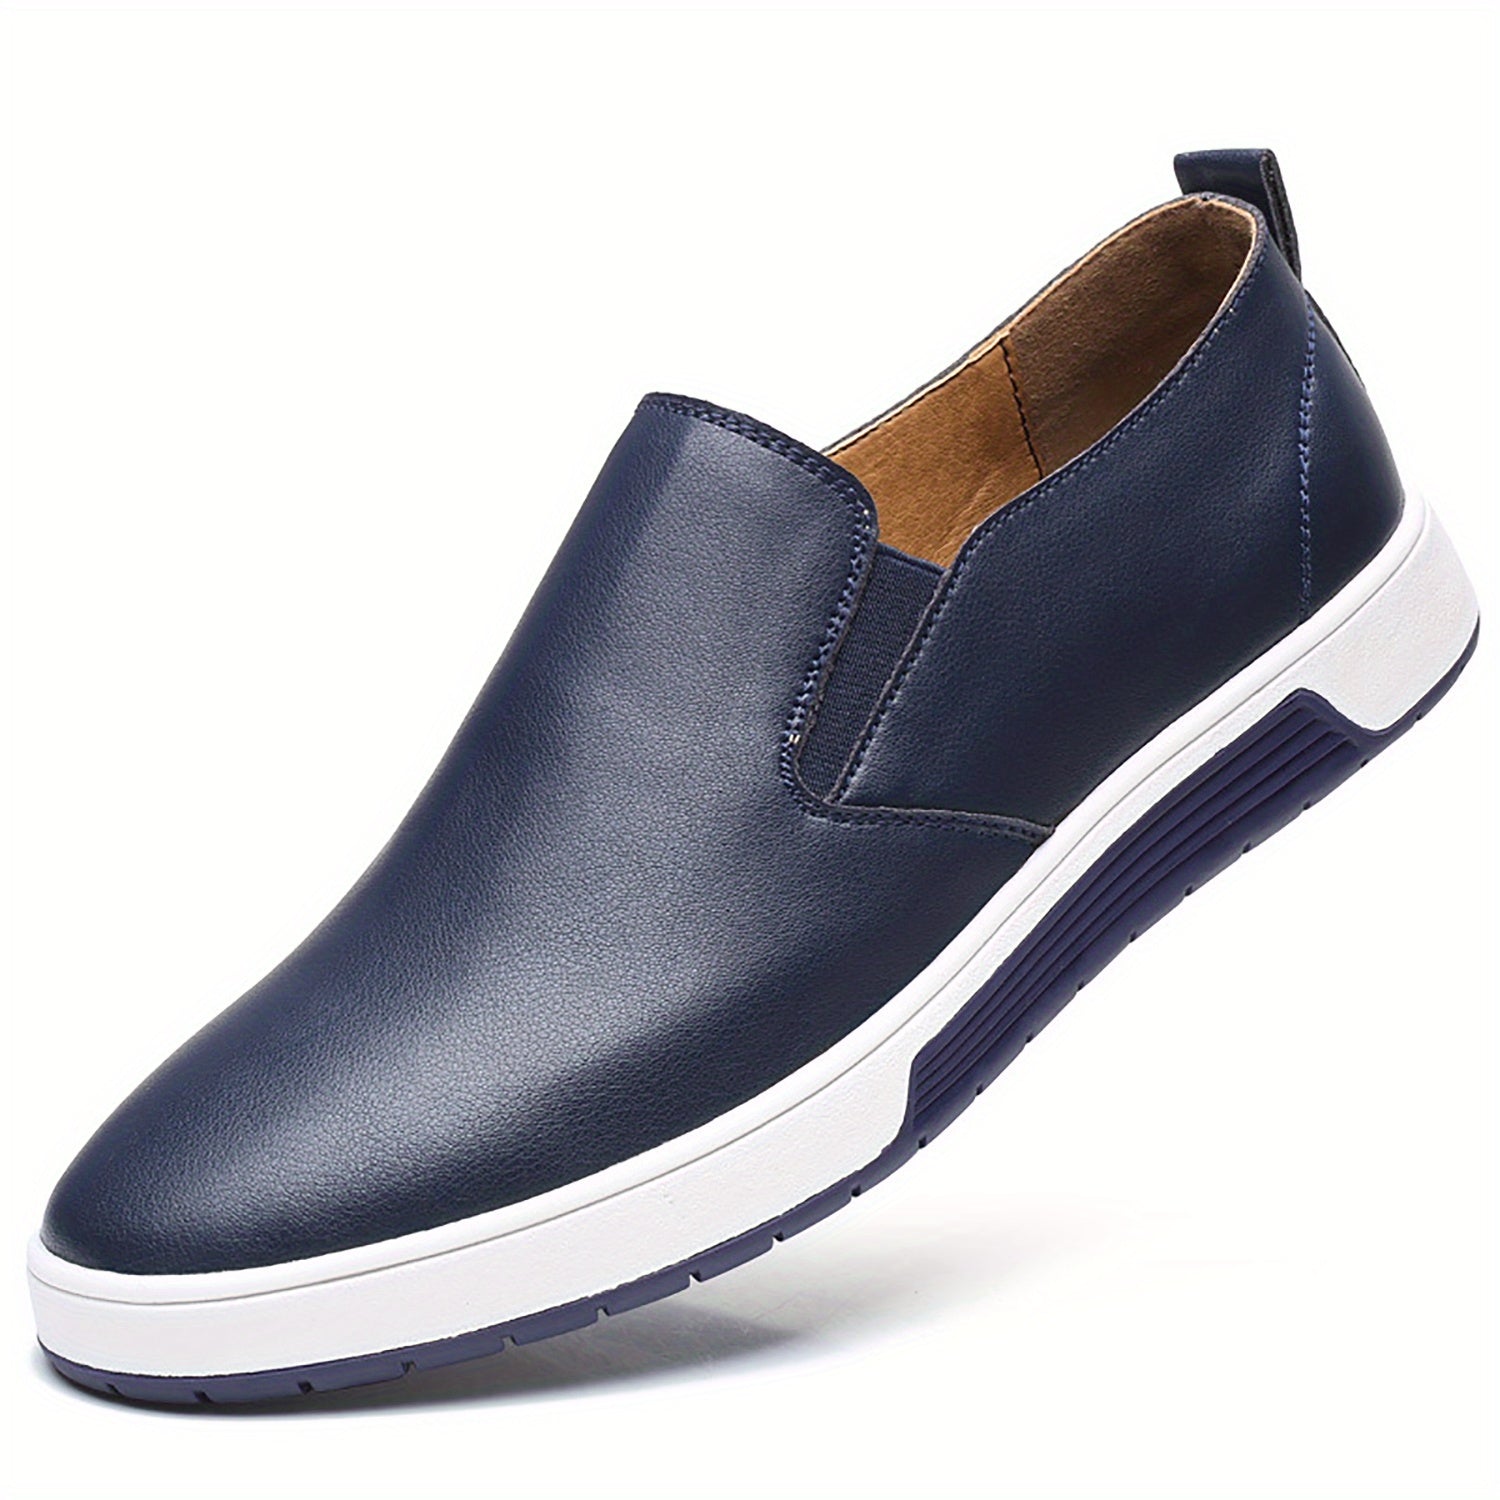 Step into Simplicity with Minimalist Flat Loafers Shoes for Every Occasion - Men's Shoes-CasualFlowshop 